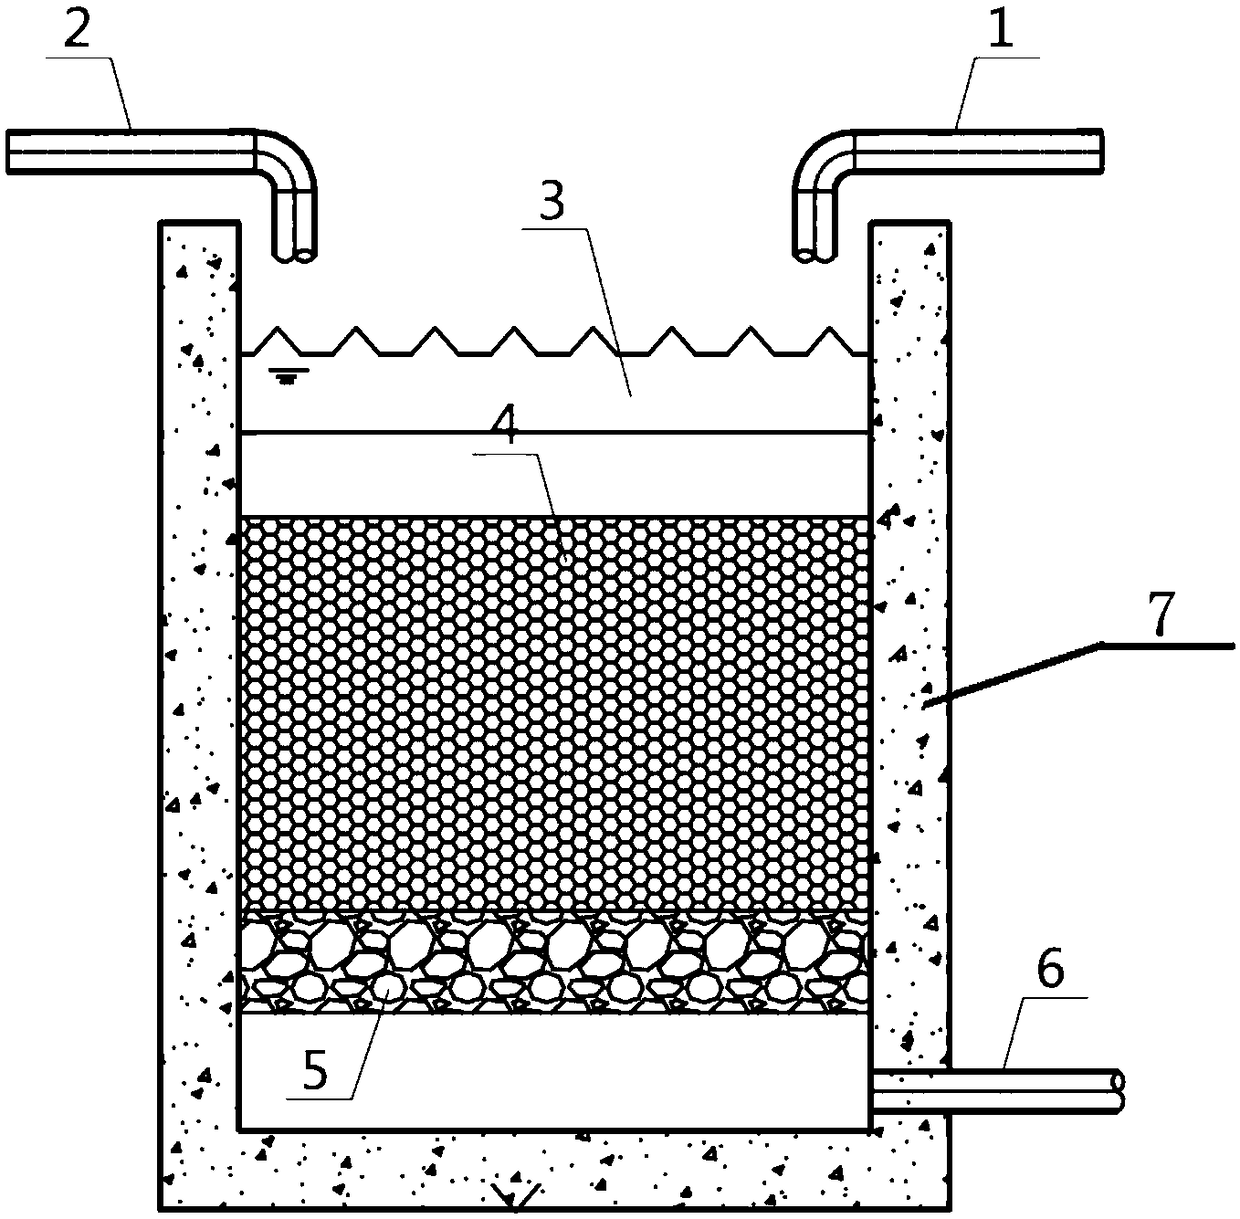 A magnetic filtration process and device for removing hydrocarbon-based pollutants in wastewater